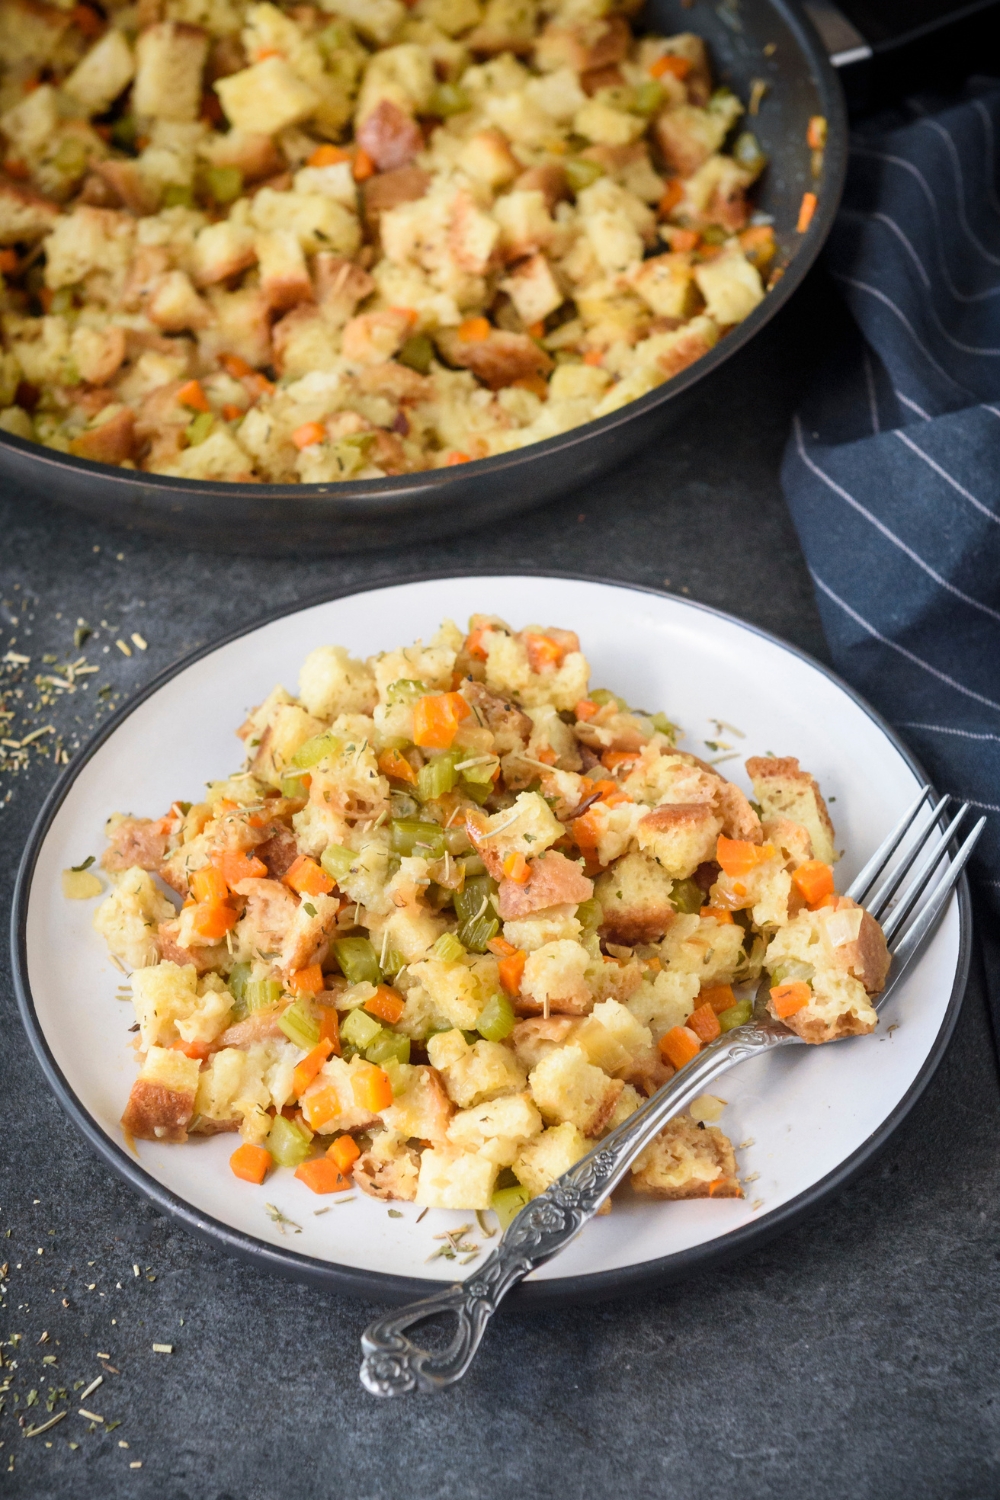 A plate of stovetop stuffing with diced celery and carrots mixed in with the stuffing. There is a fork on the plate and the rest of the stuffing is in a skillet in the background.